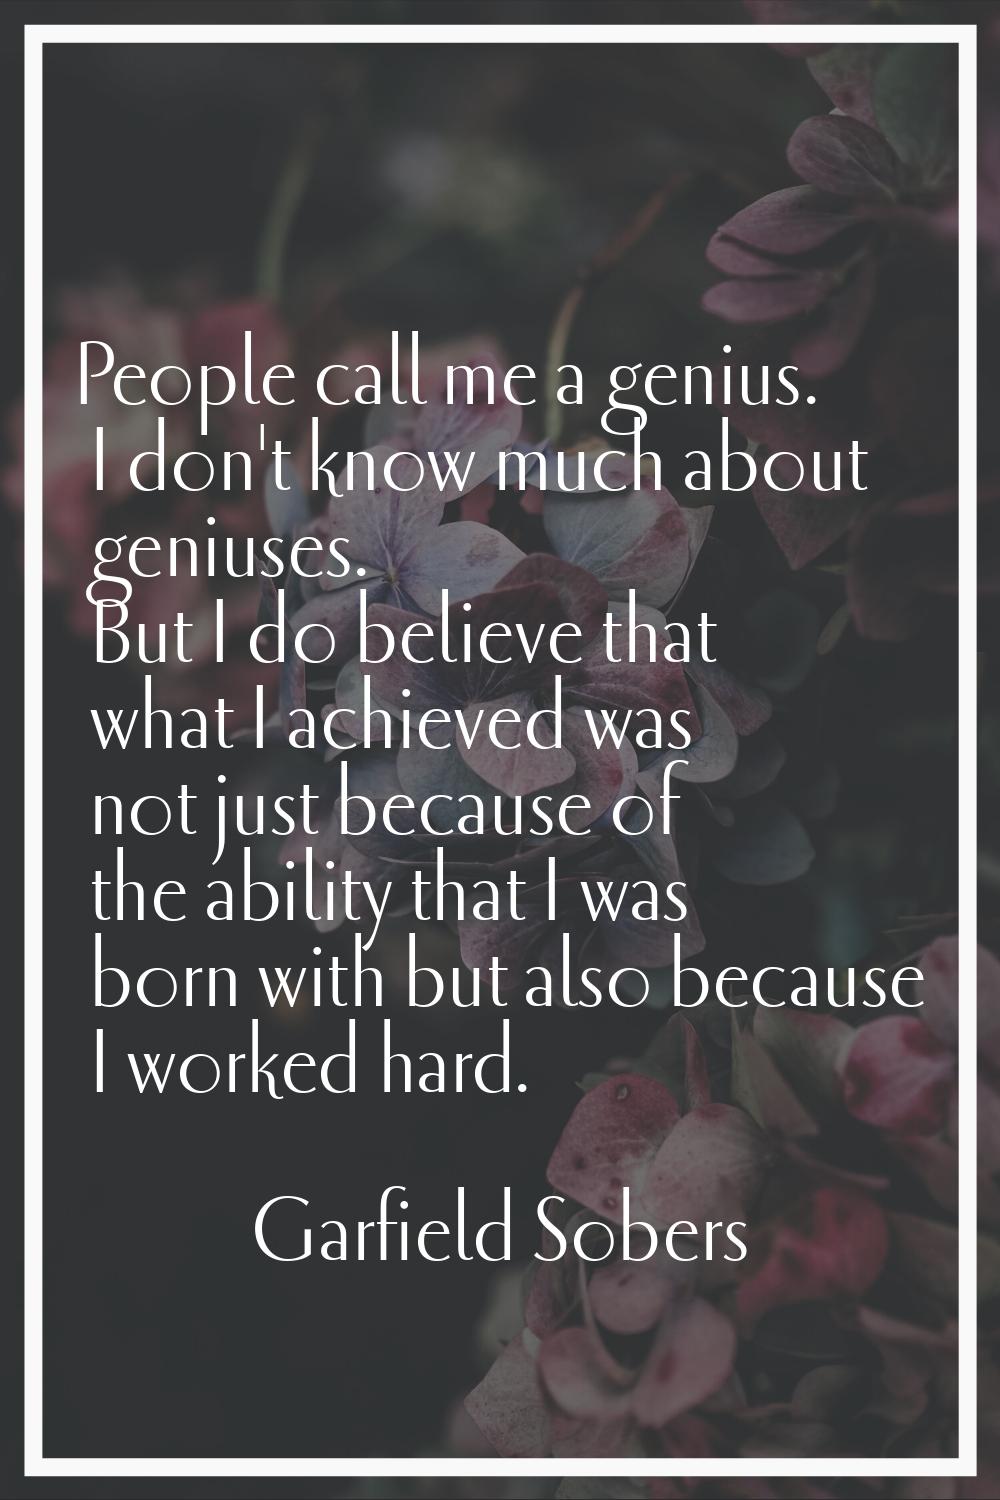 People call me a genius. I don't know much about geniuses. But I do believe that what I achieved wa